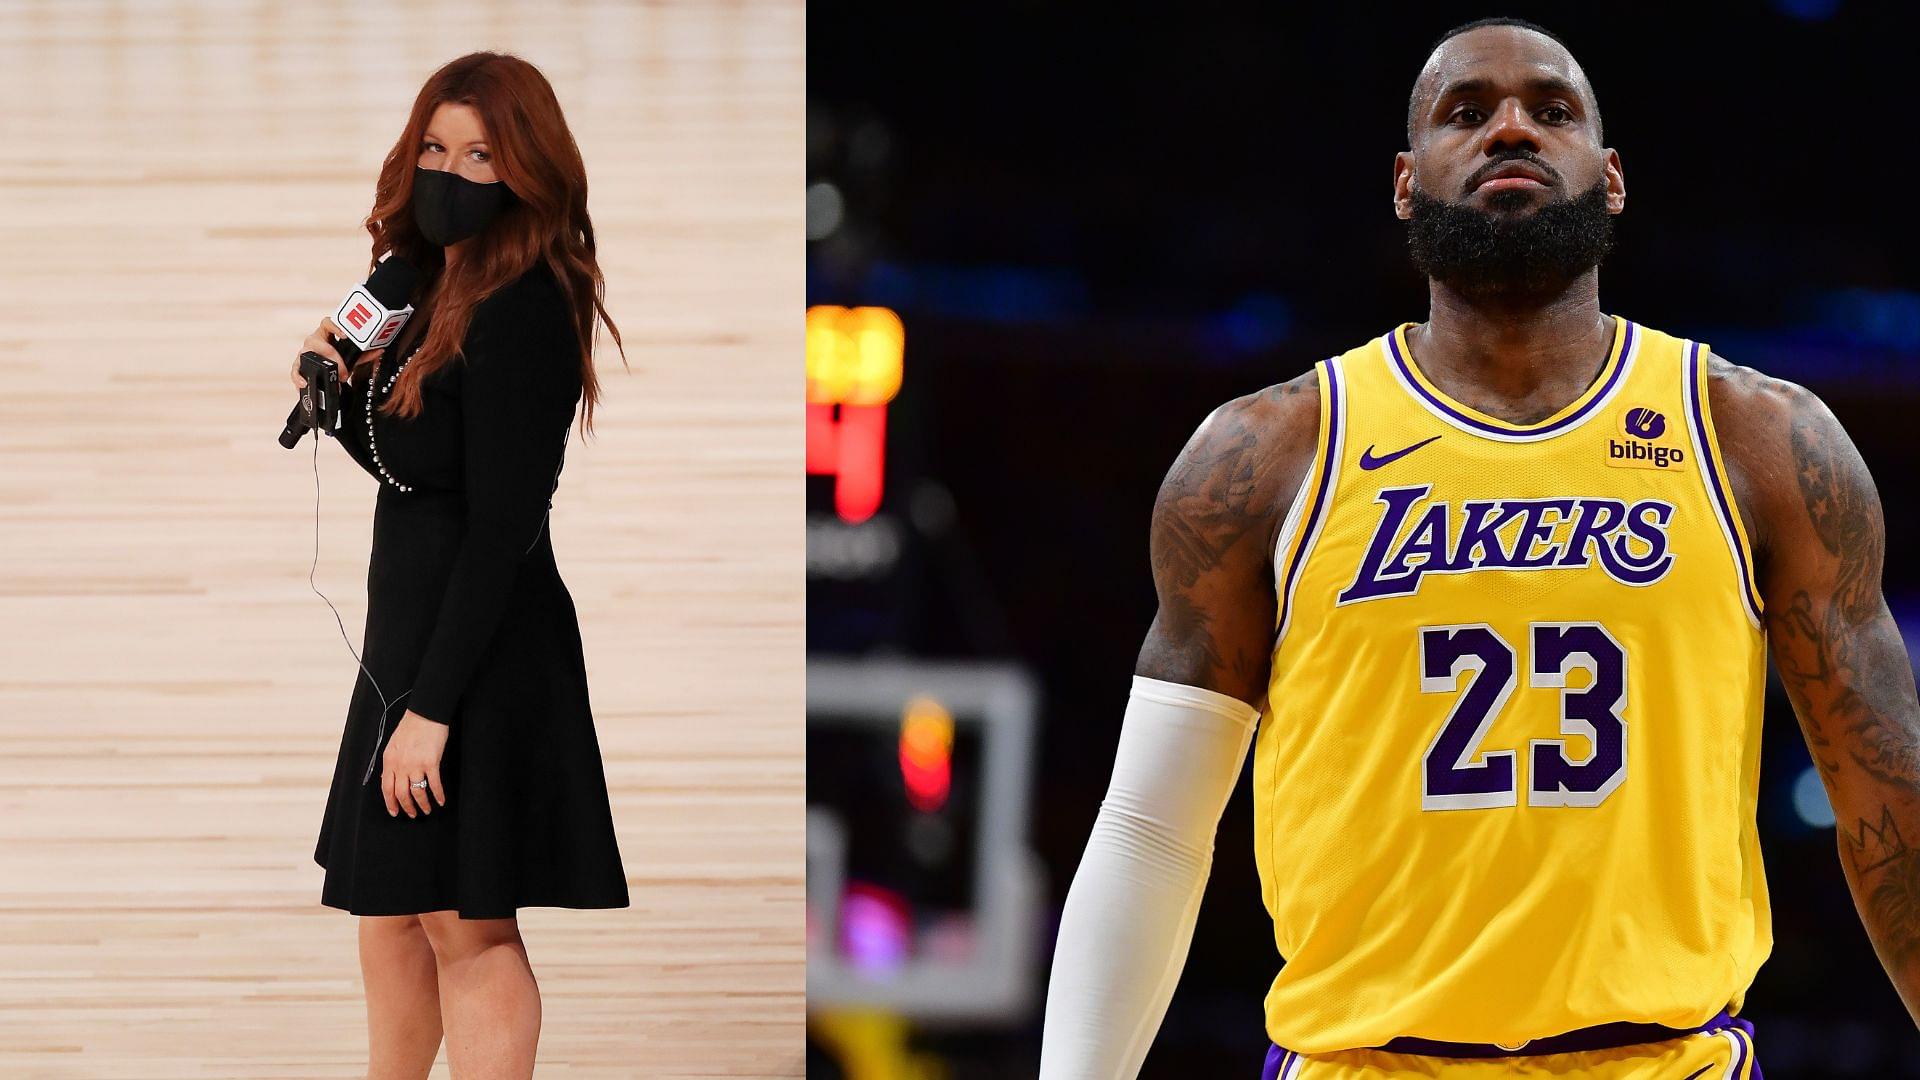 “Vote to Just Call the Series”: Lakers’ Body Language After Game 3 Loss Concerns Rachel Nichols